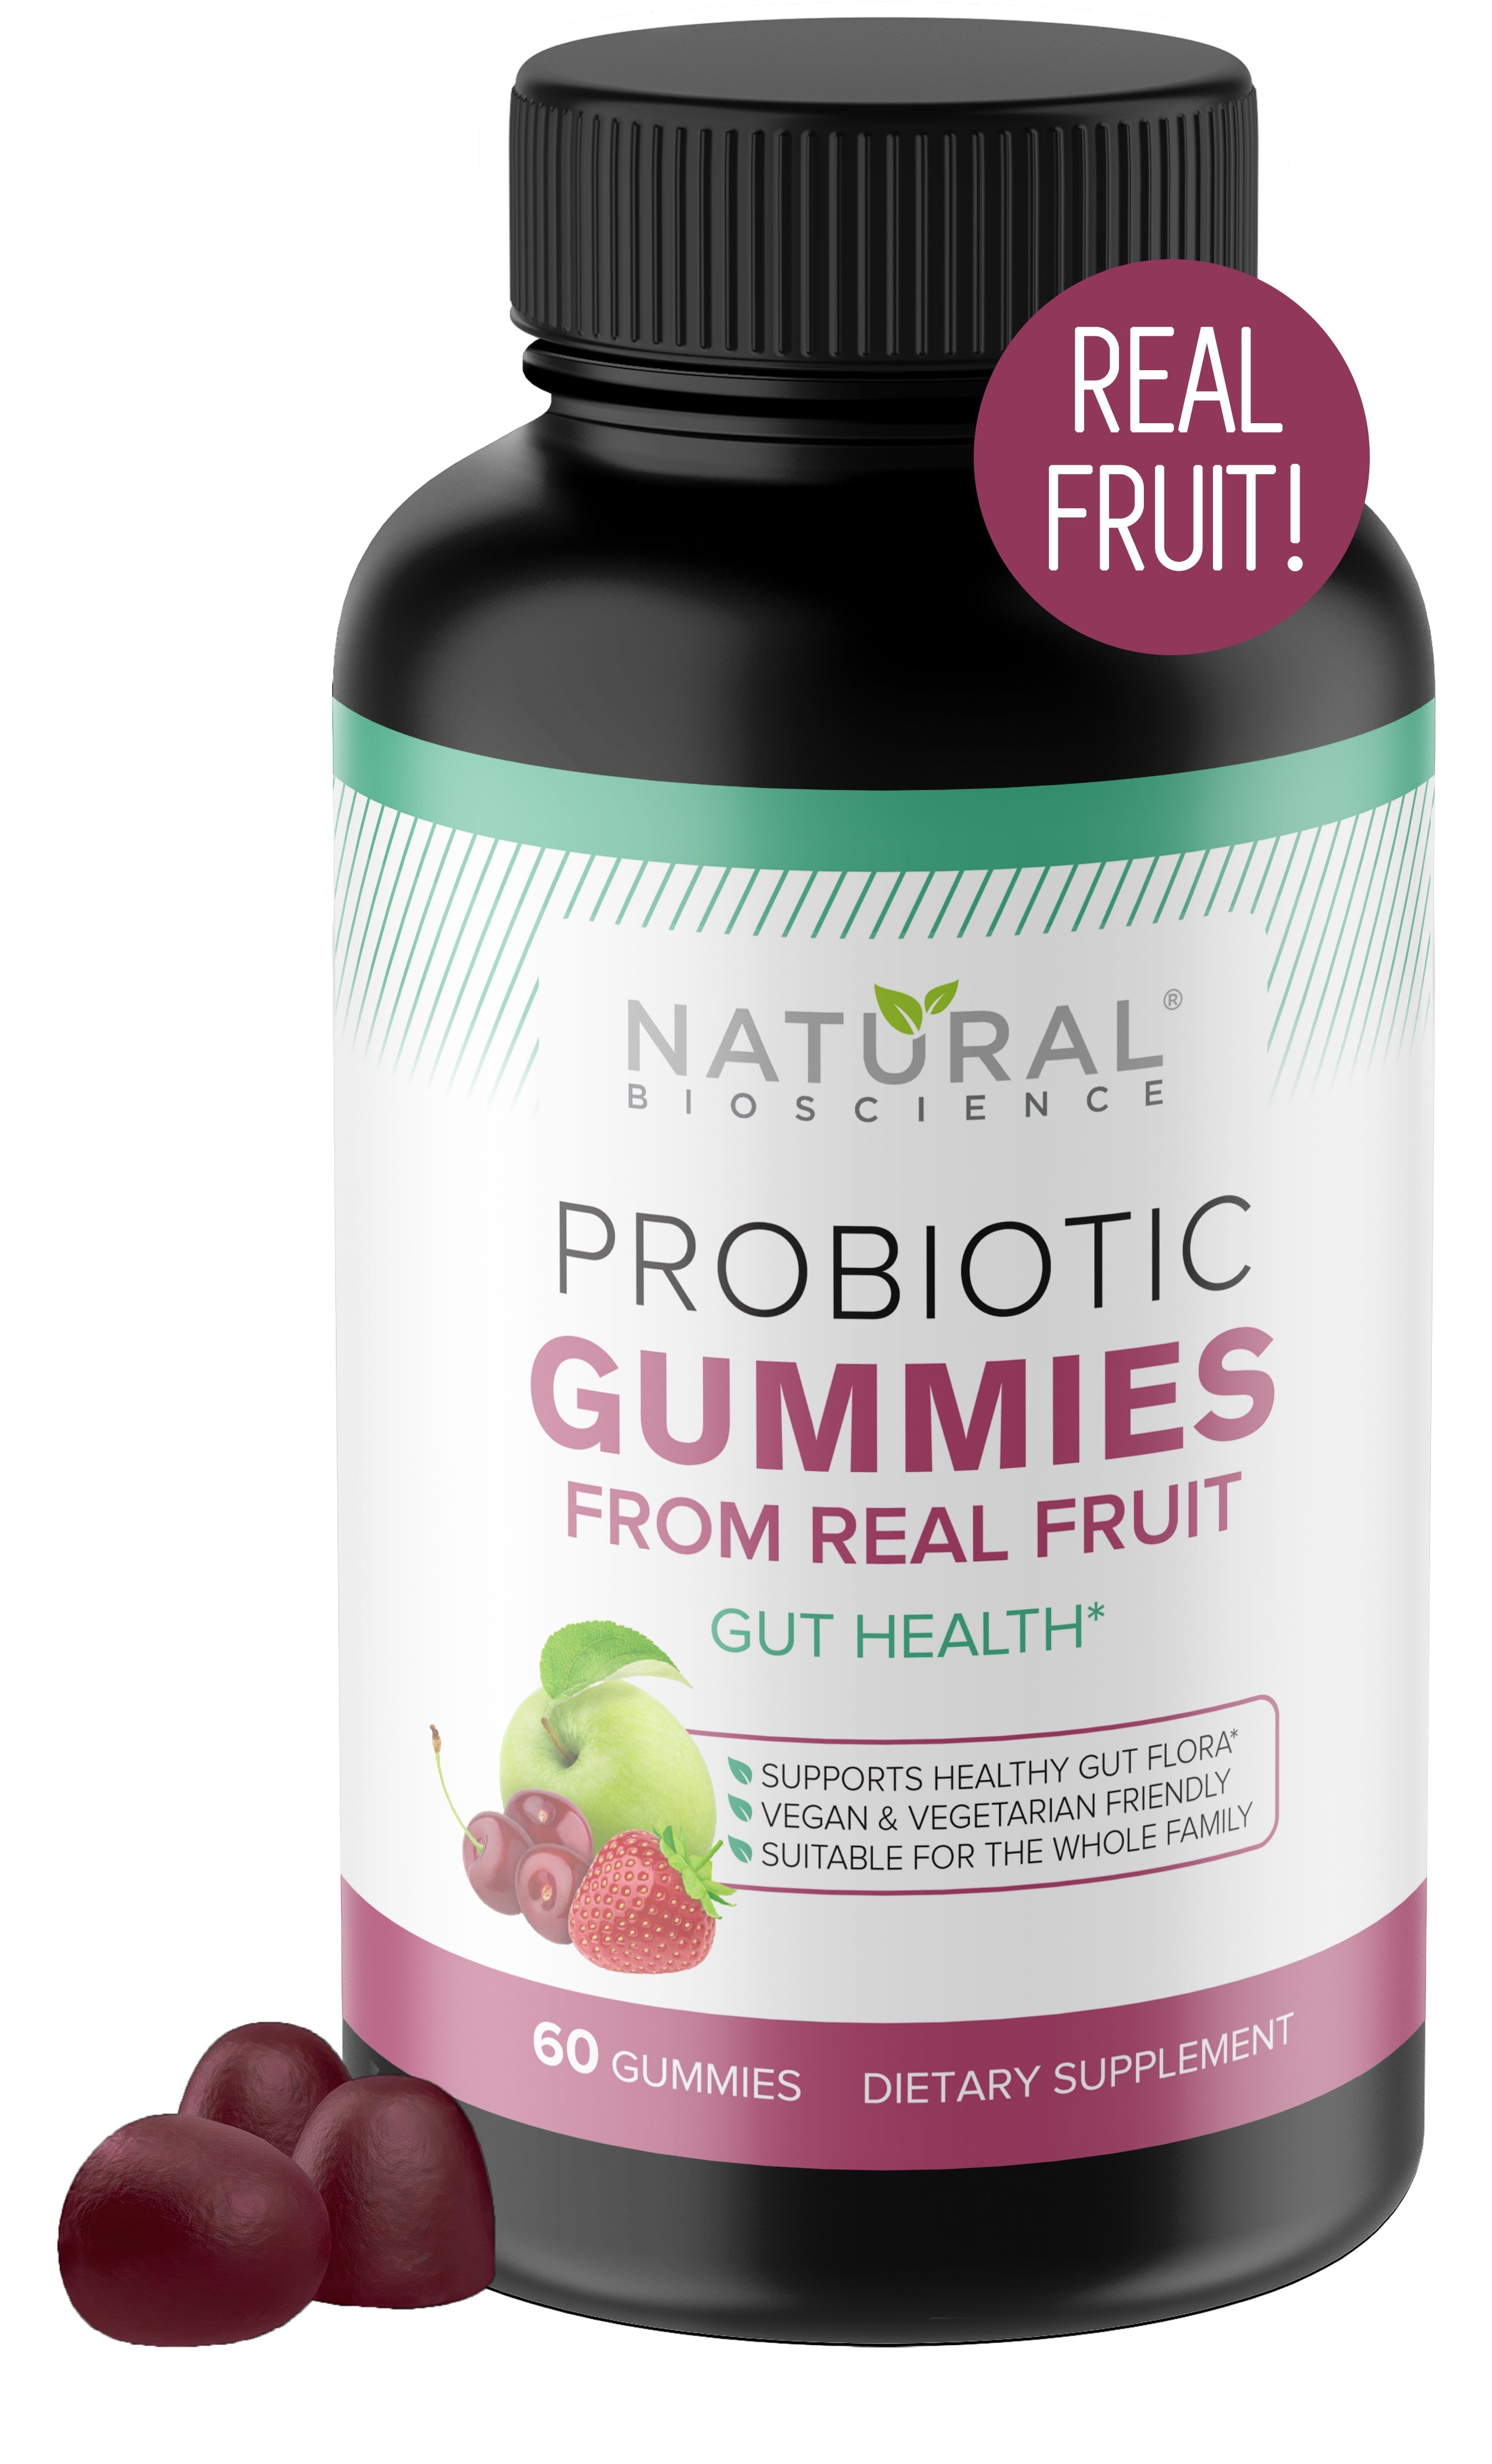 Probiotic Gummies from Real Fruit